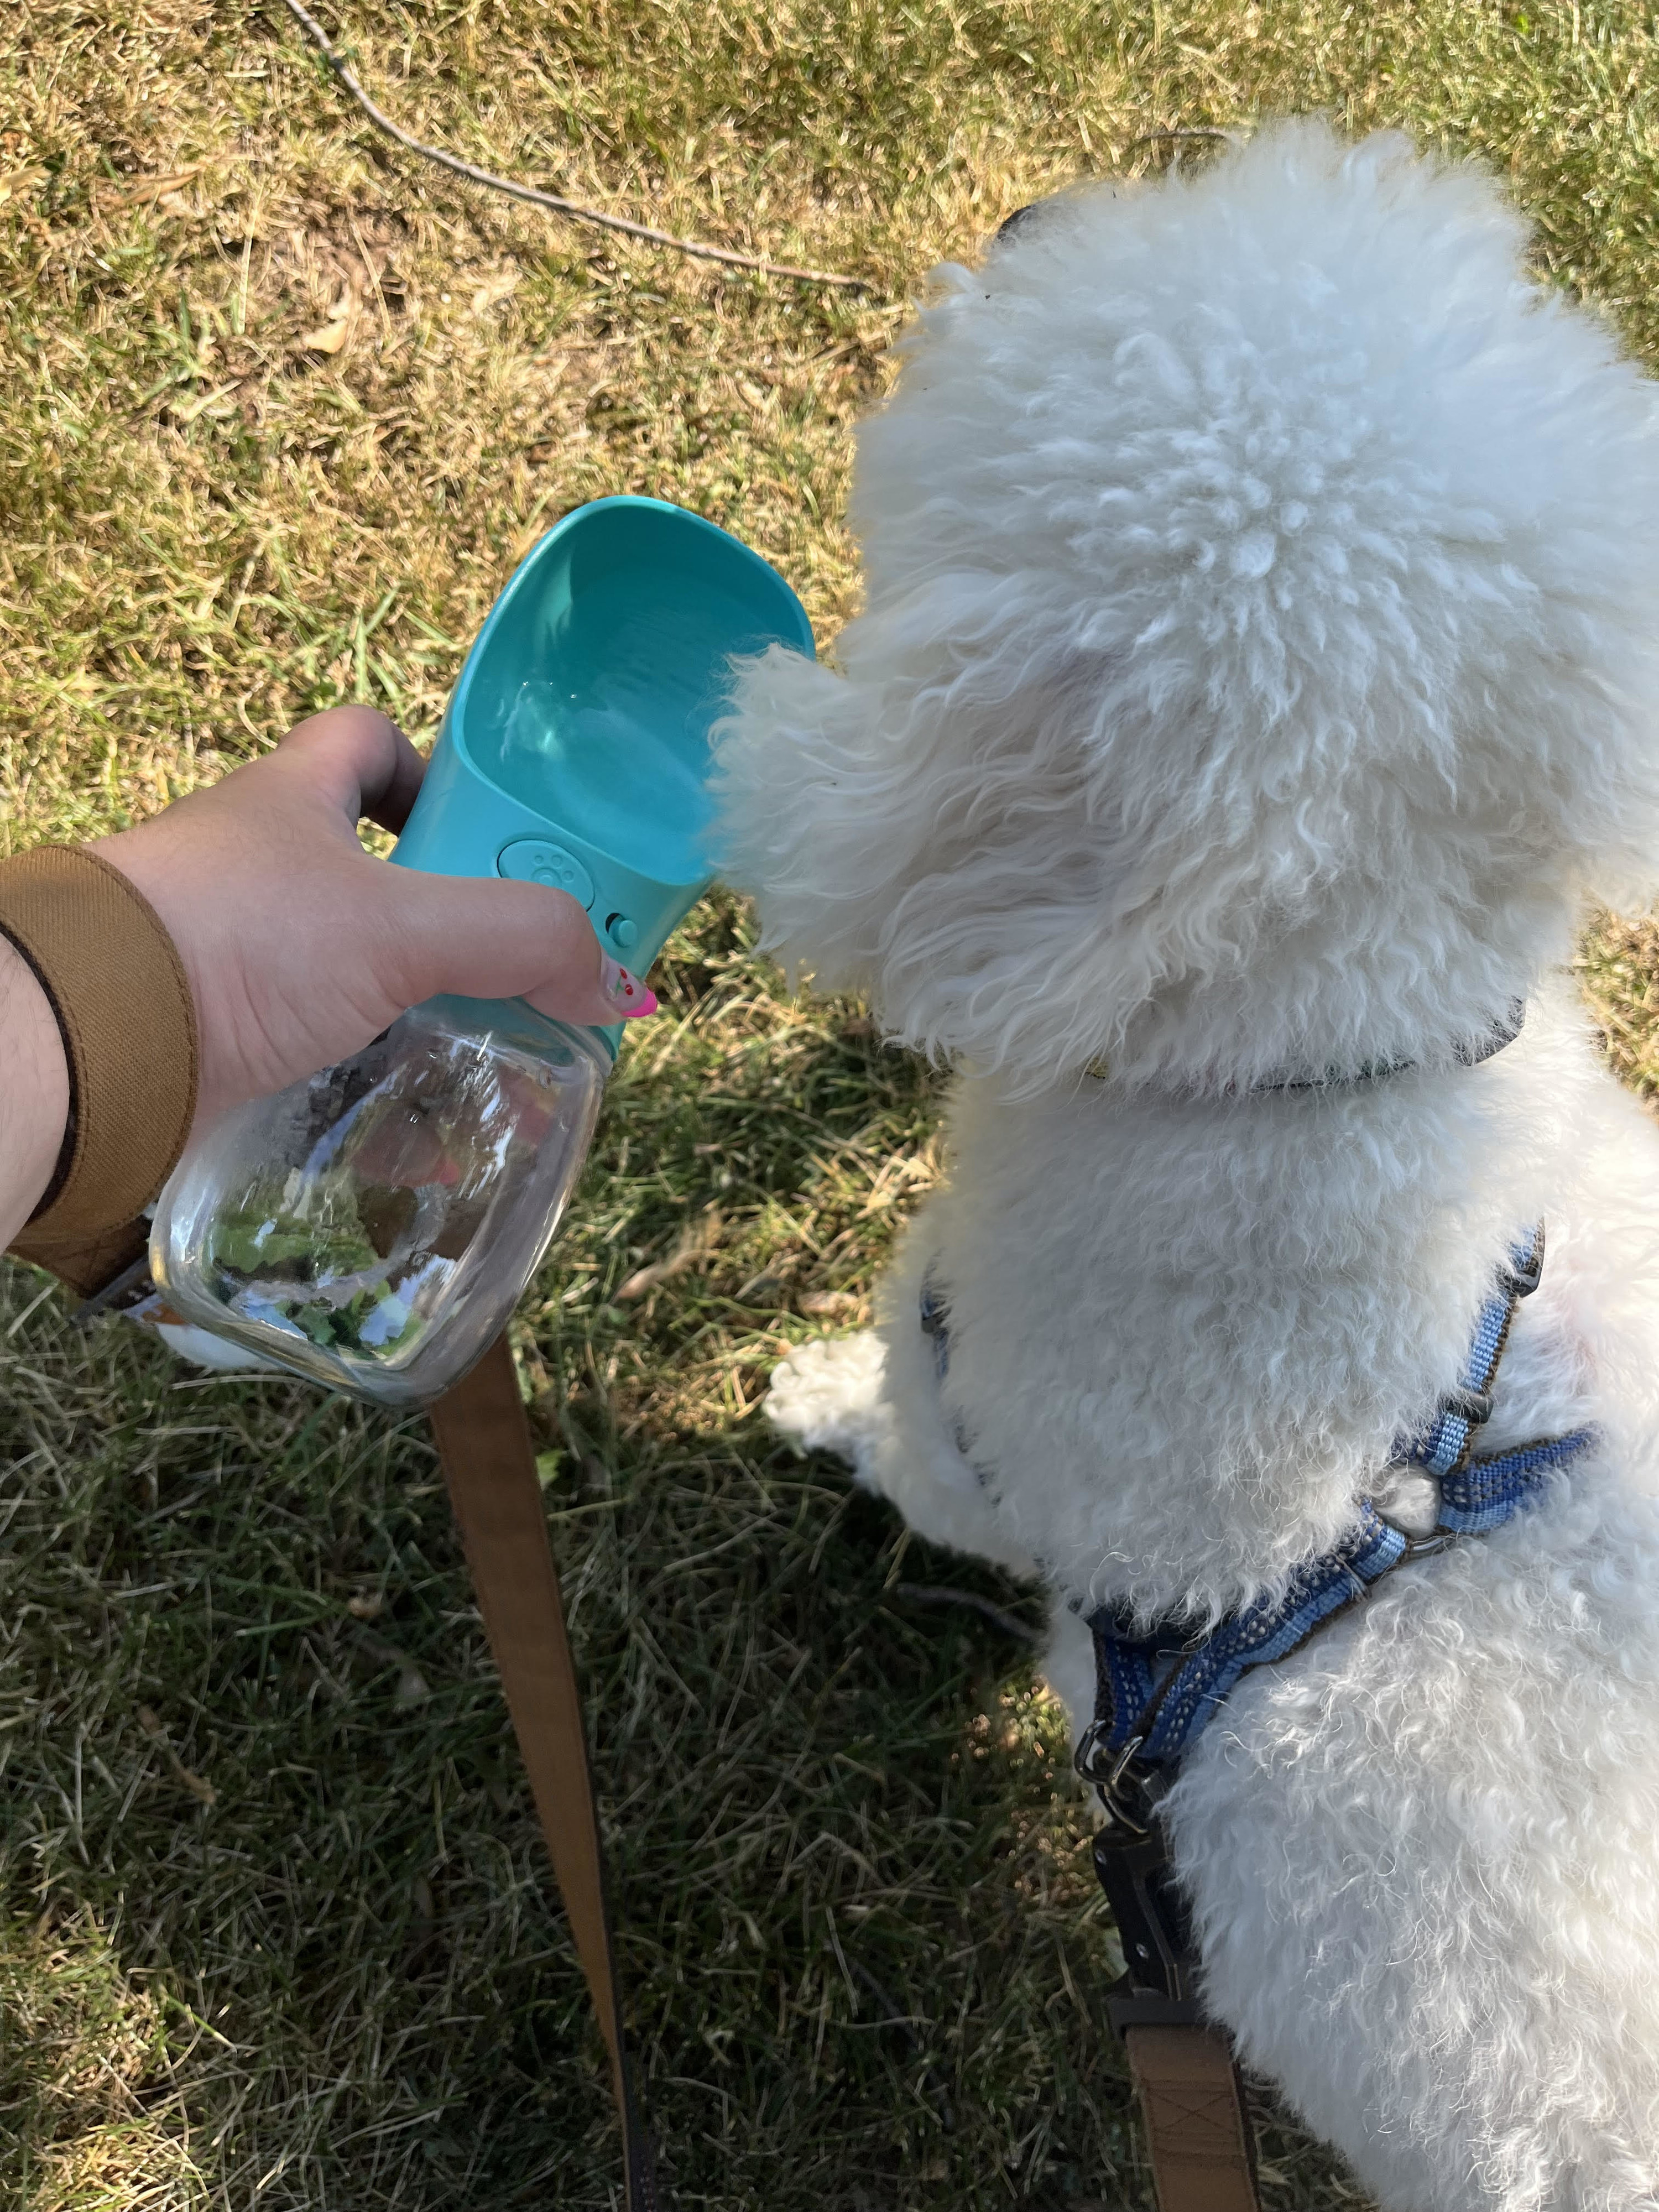 Bianca offering her dog a drink from the bottle